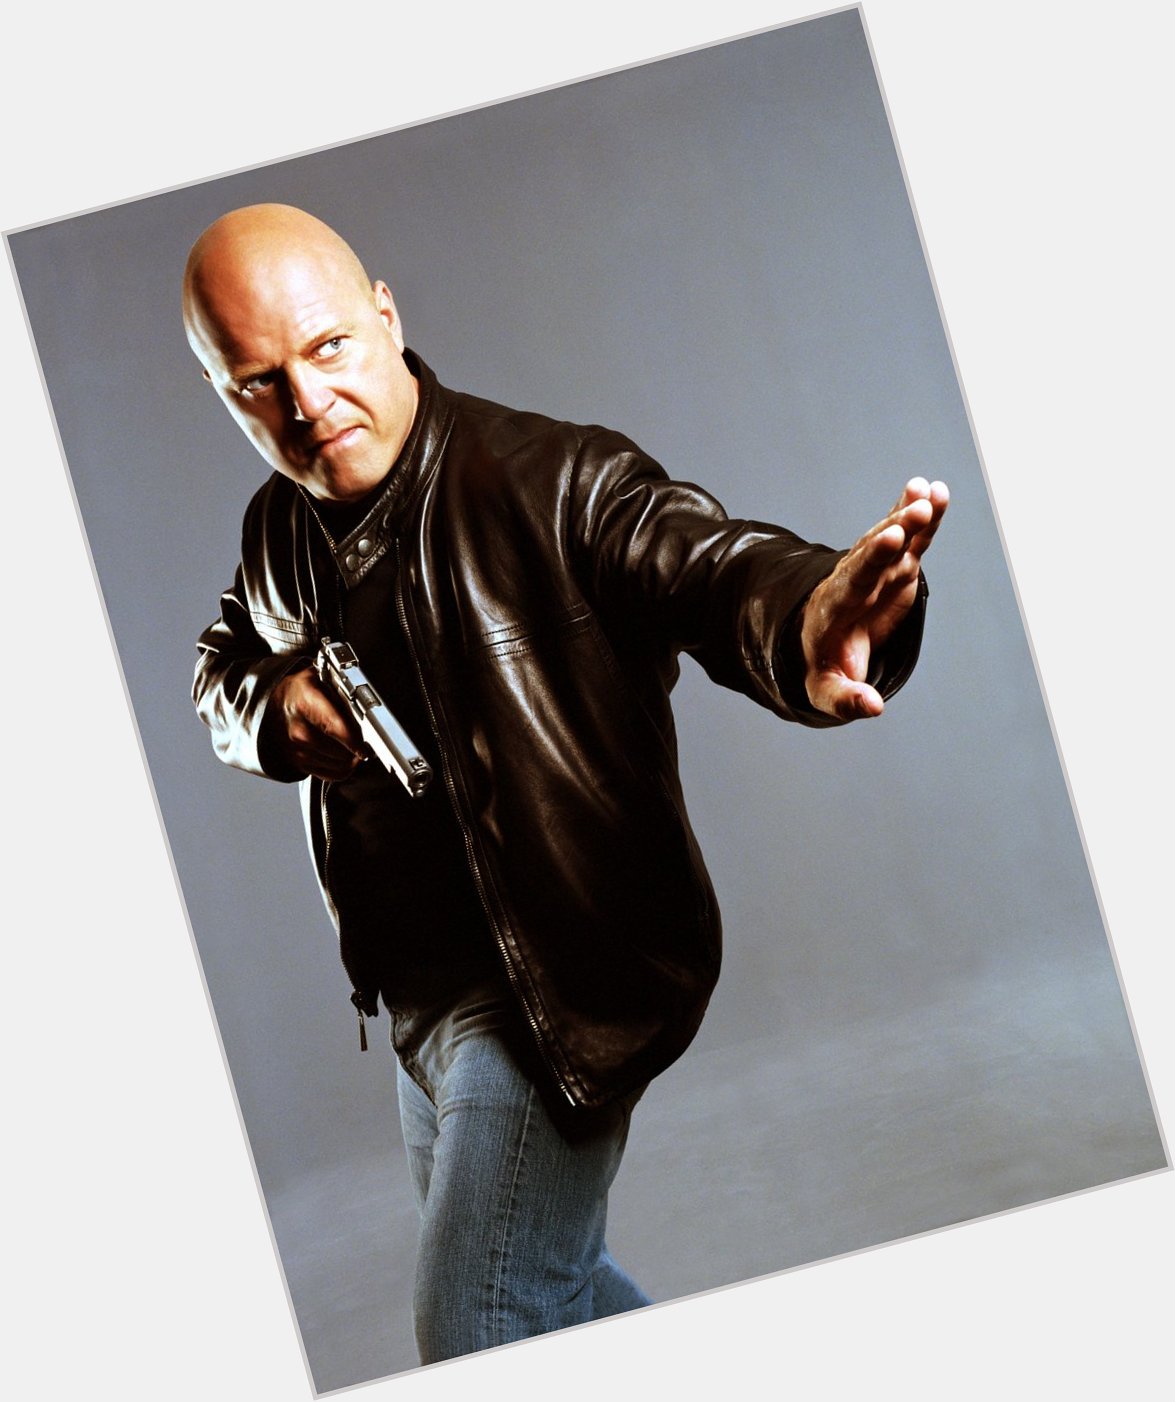 Happy Birthday to Michael Chiklis who turns 54 today! 